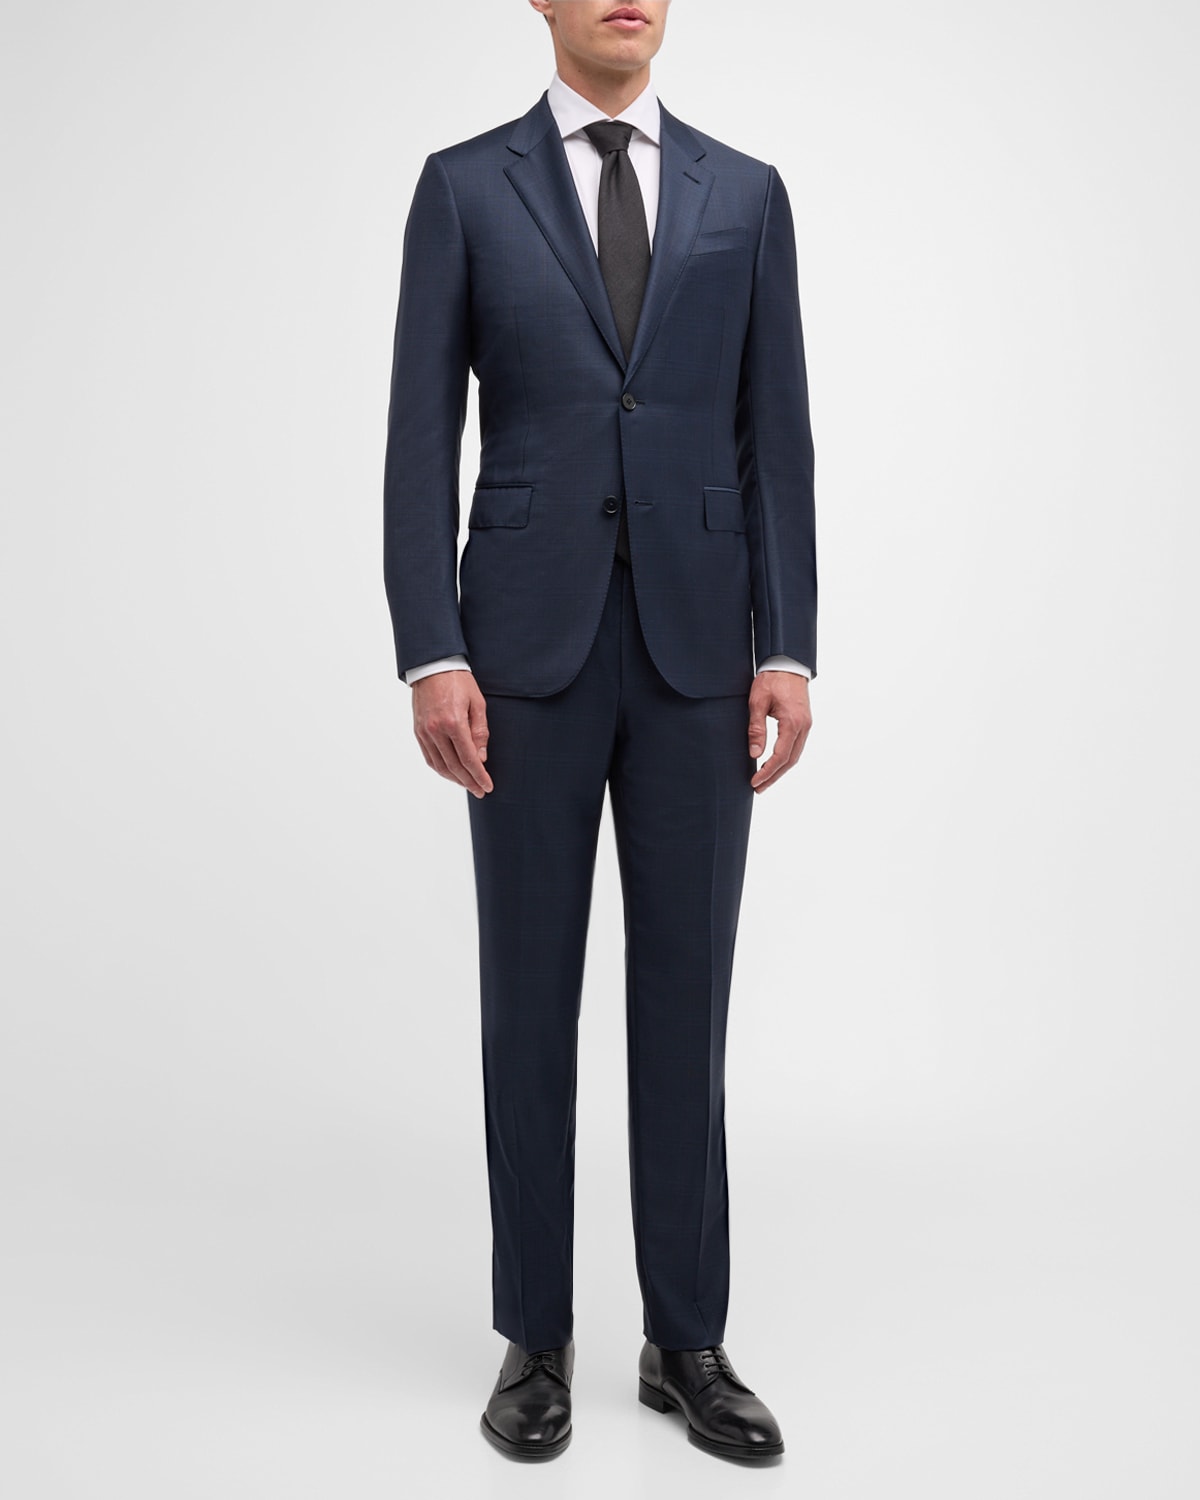 Zegna Men's Micro Houndstooth Plaid Suit In Blue Navy Check